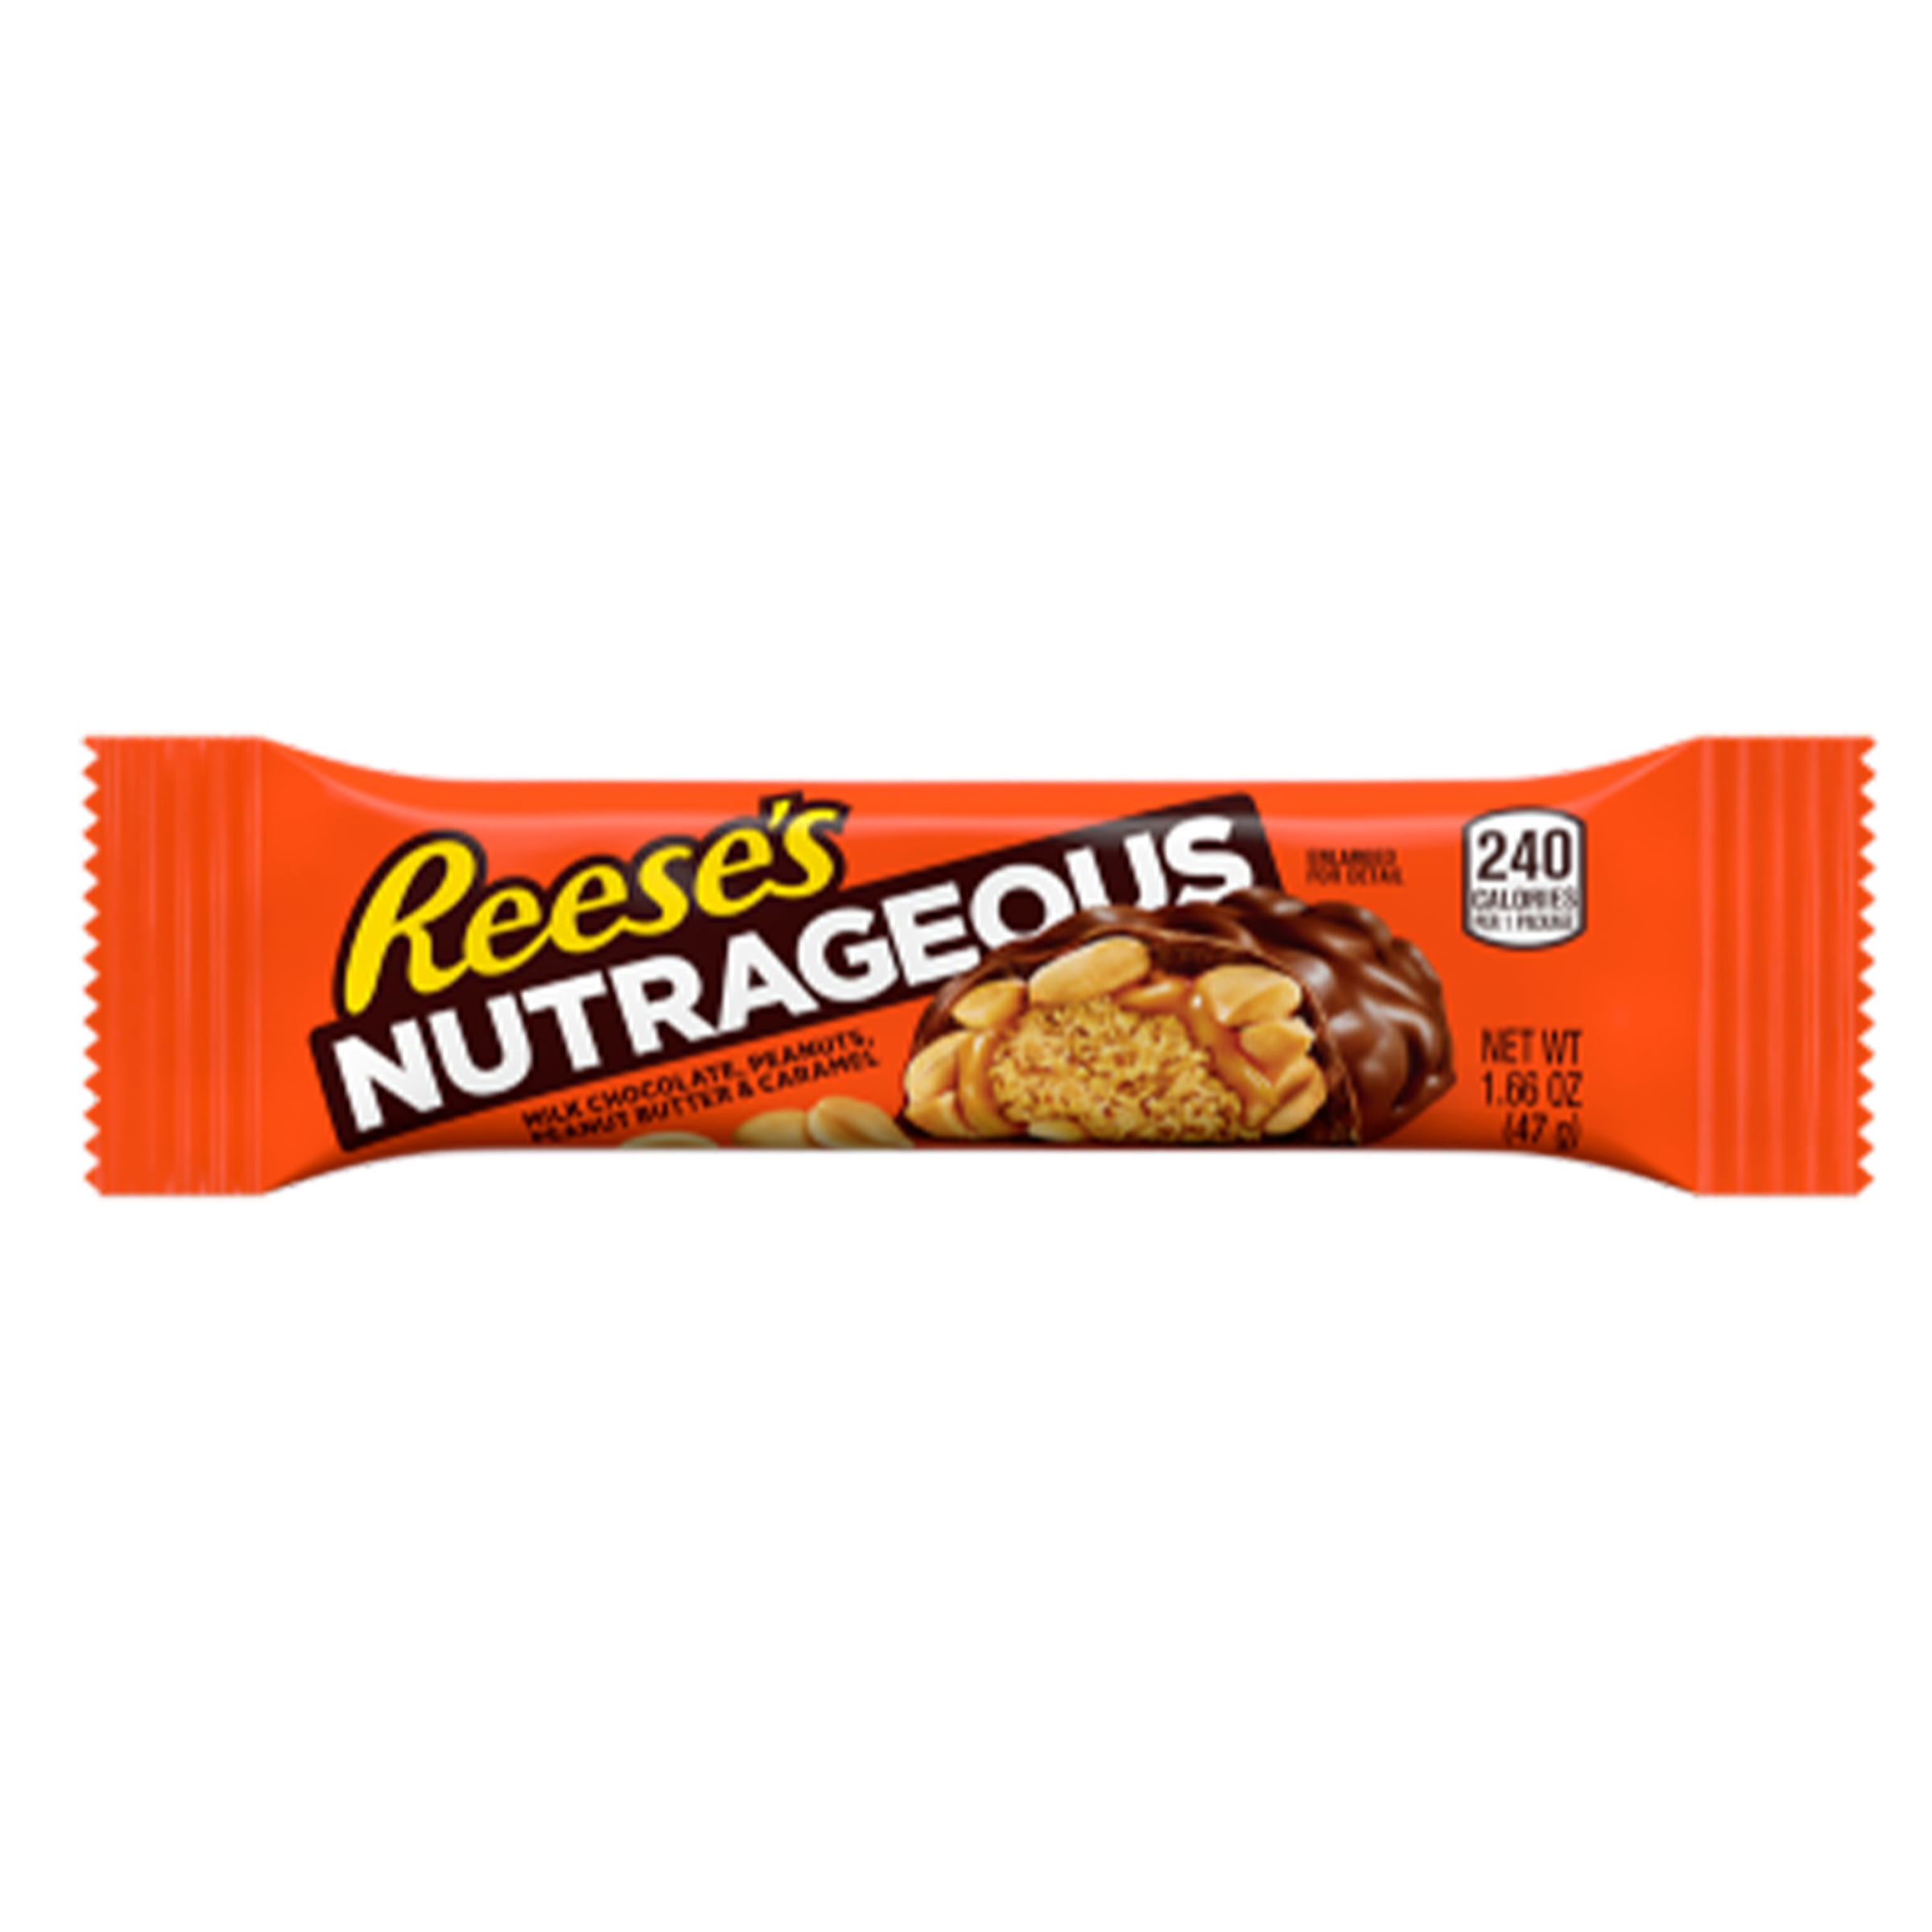 Reese's - Nutrageous